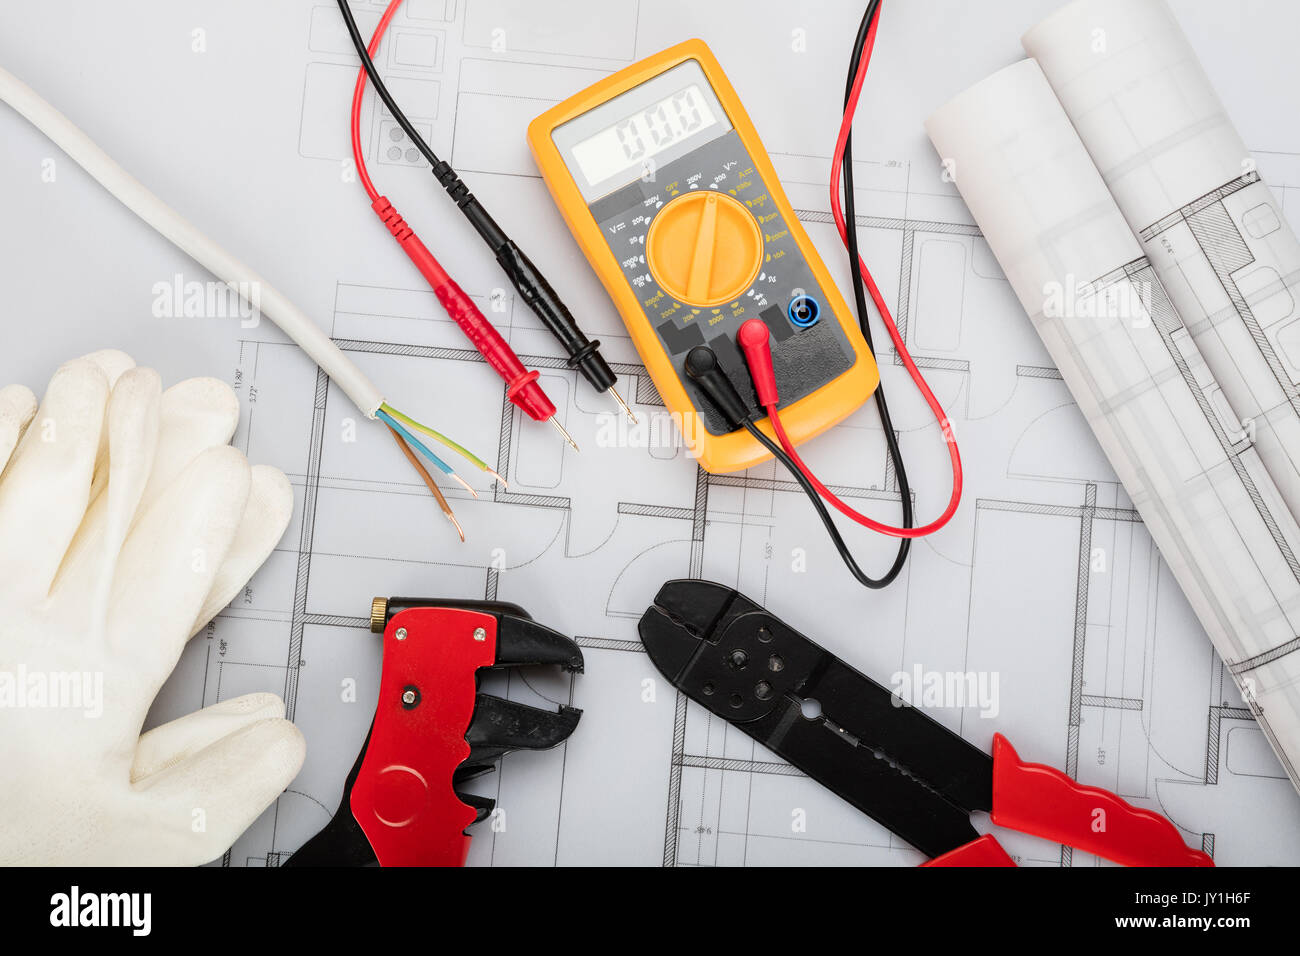 High Angle View Of Electrical Components Arranged On Plans Stock Photo